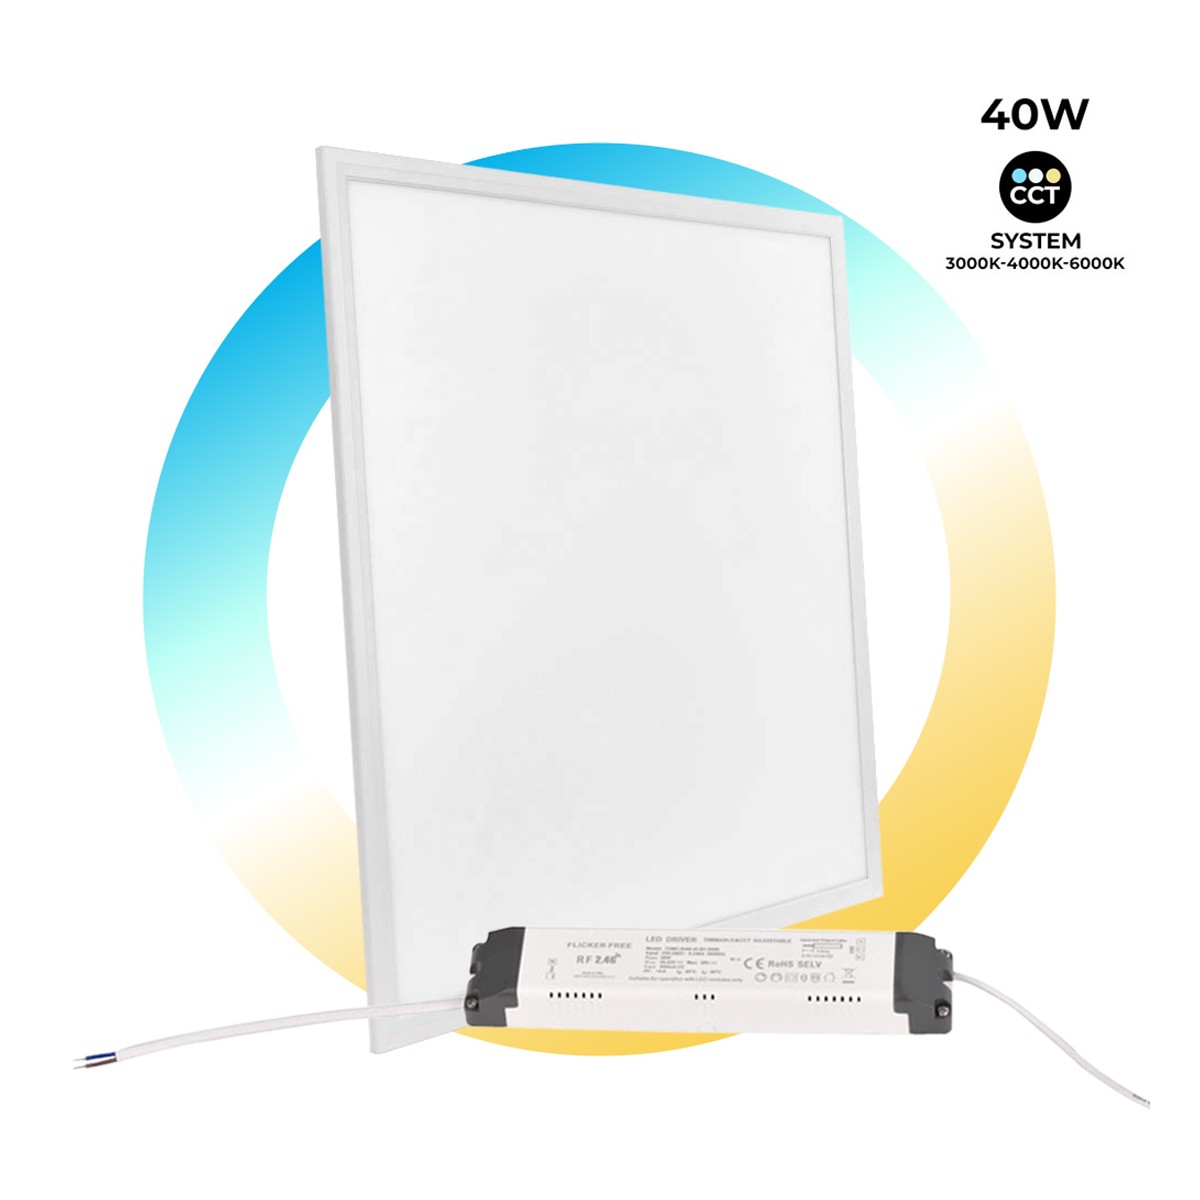 LED slim cm - CCT Dimmable 40W - panel 60x60